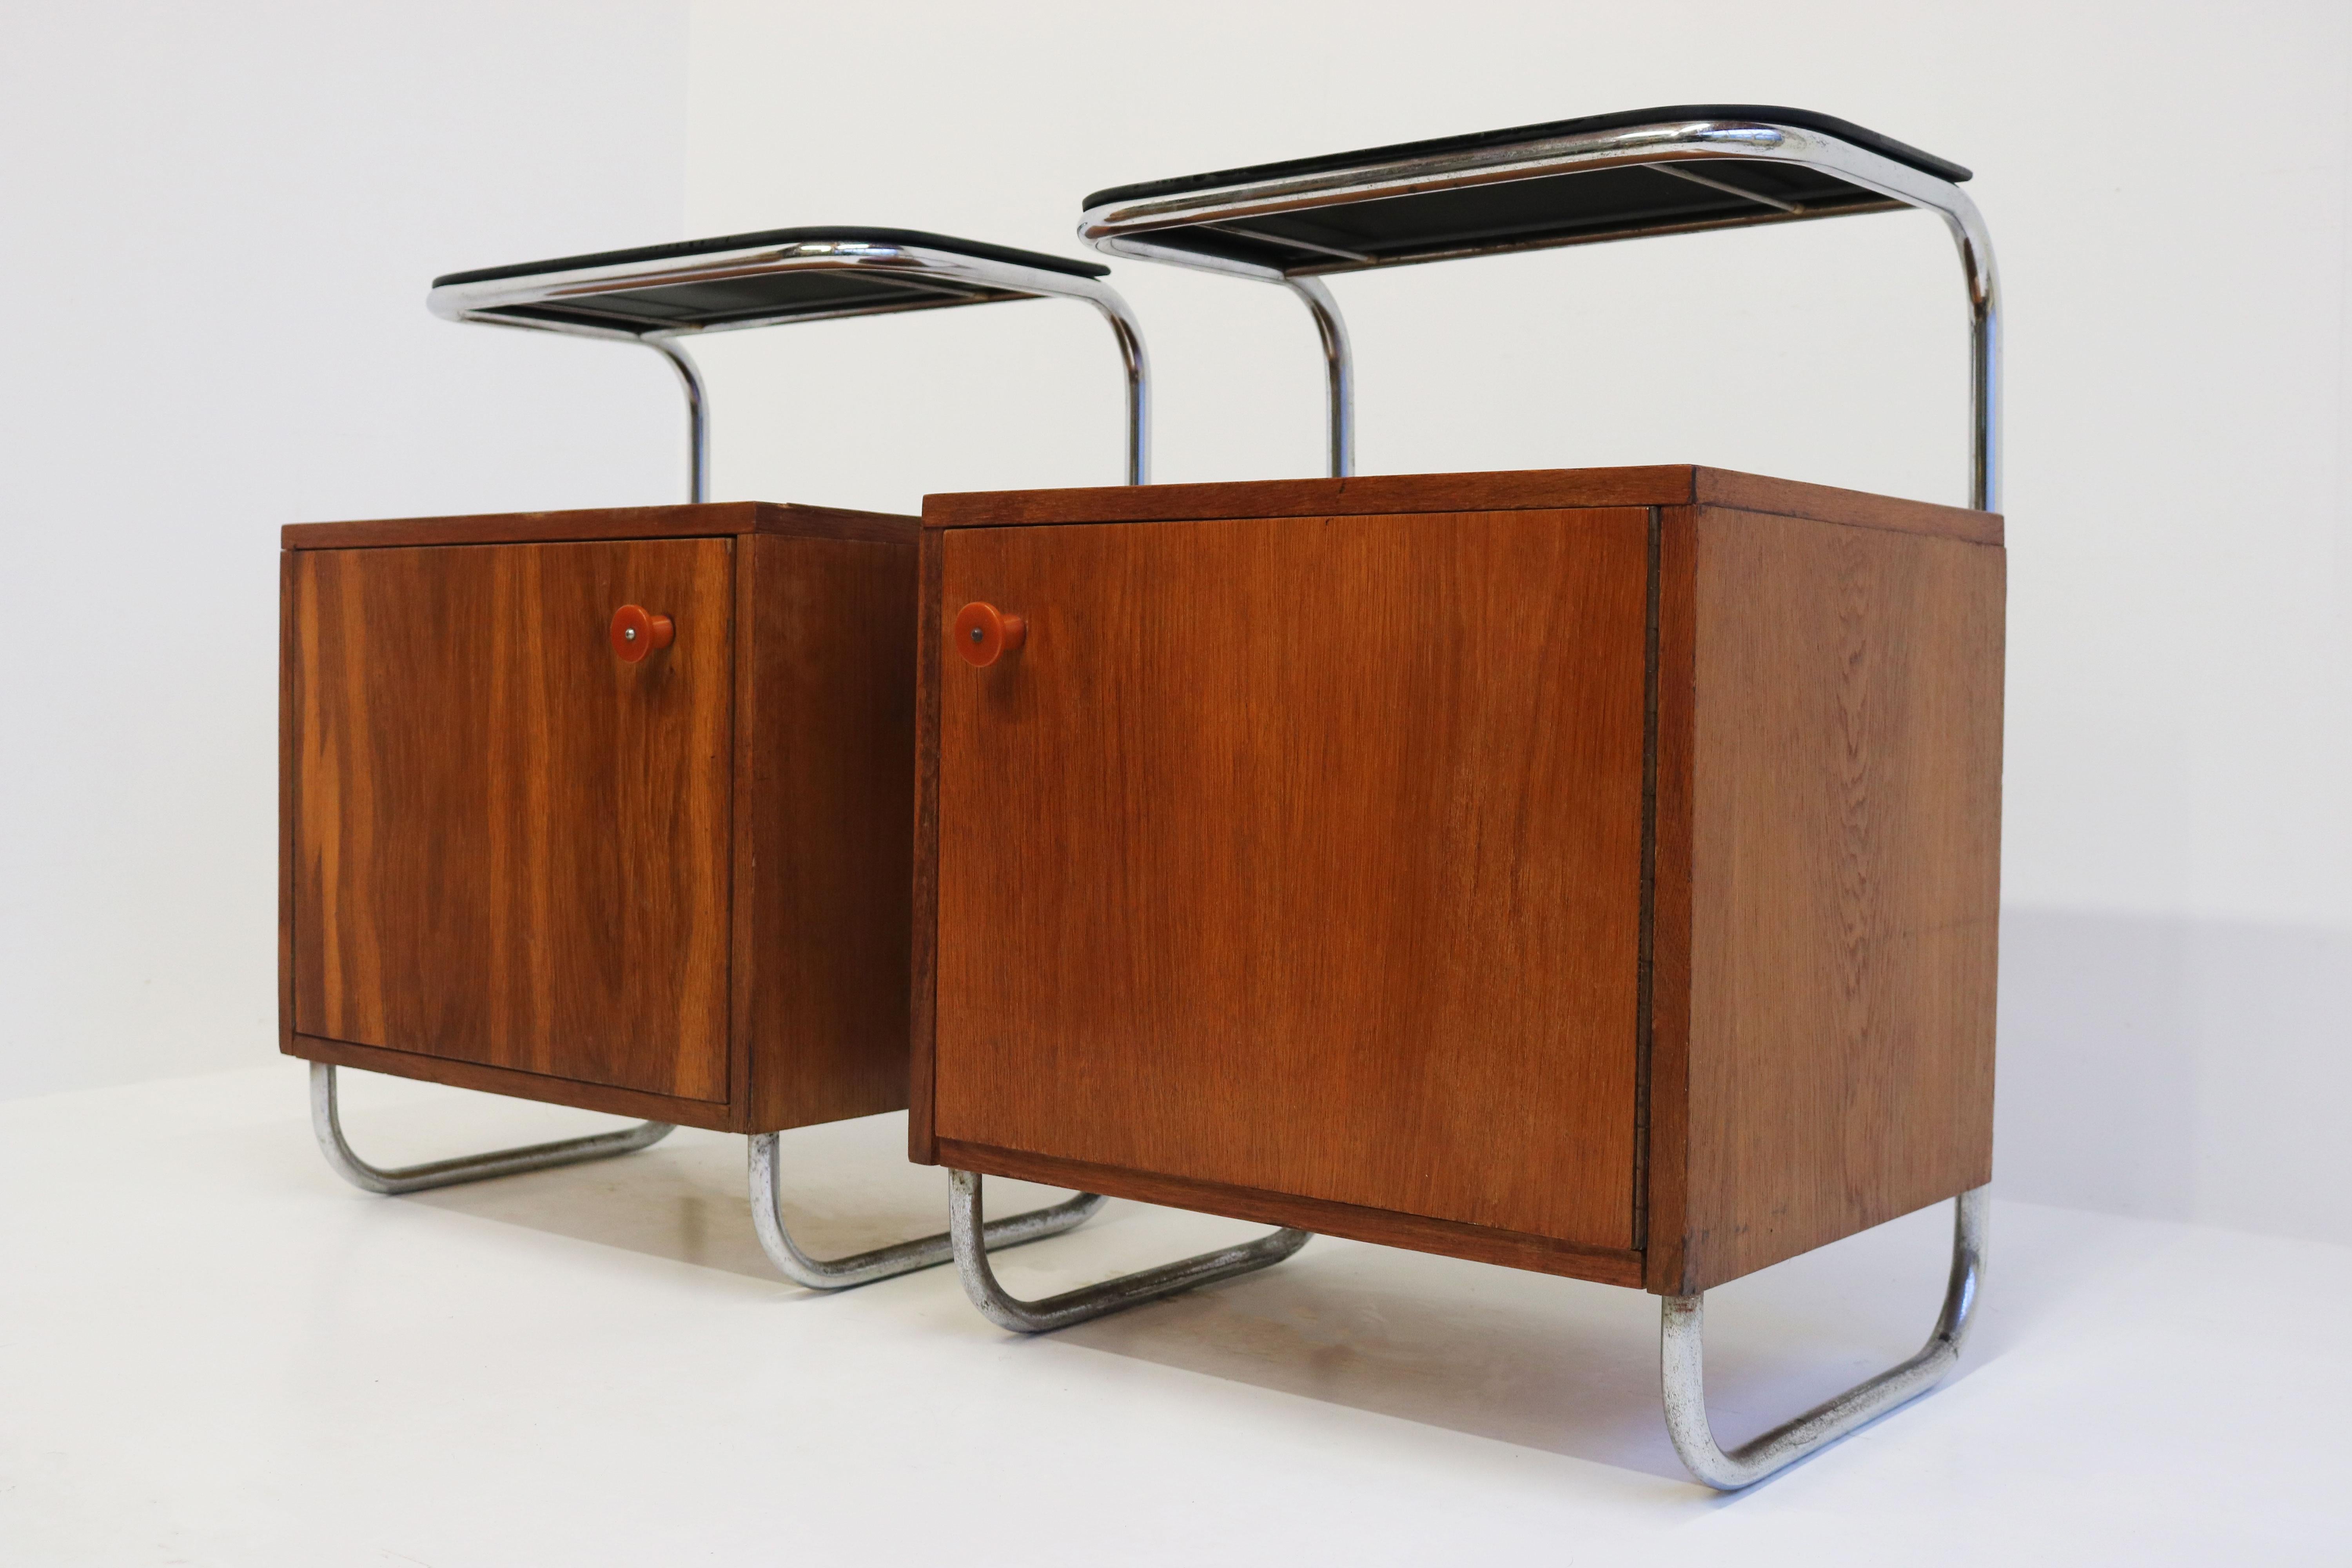 Stylish & timeless ! This rare pair of antique Art Deco German nightstands by Bauhaus 1930. 
The combination of tubular chrome frame , the warm wood grain & black glass make this Art Deco design a true classic for many years. 
The pair has its